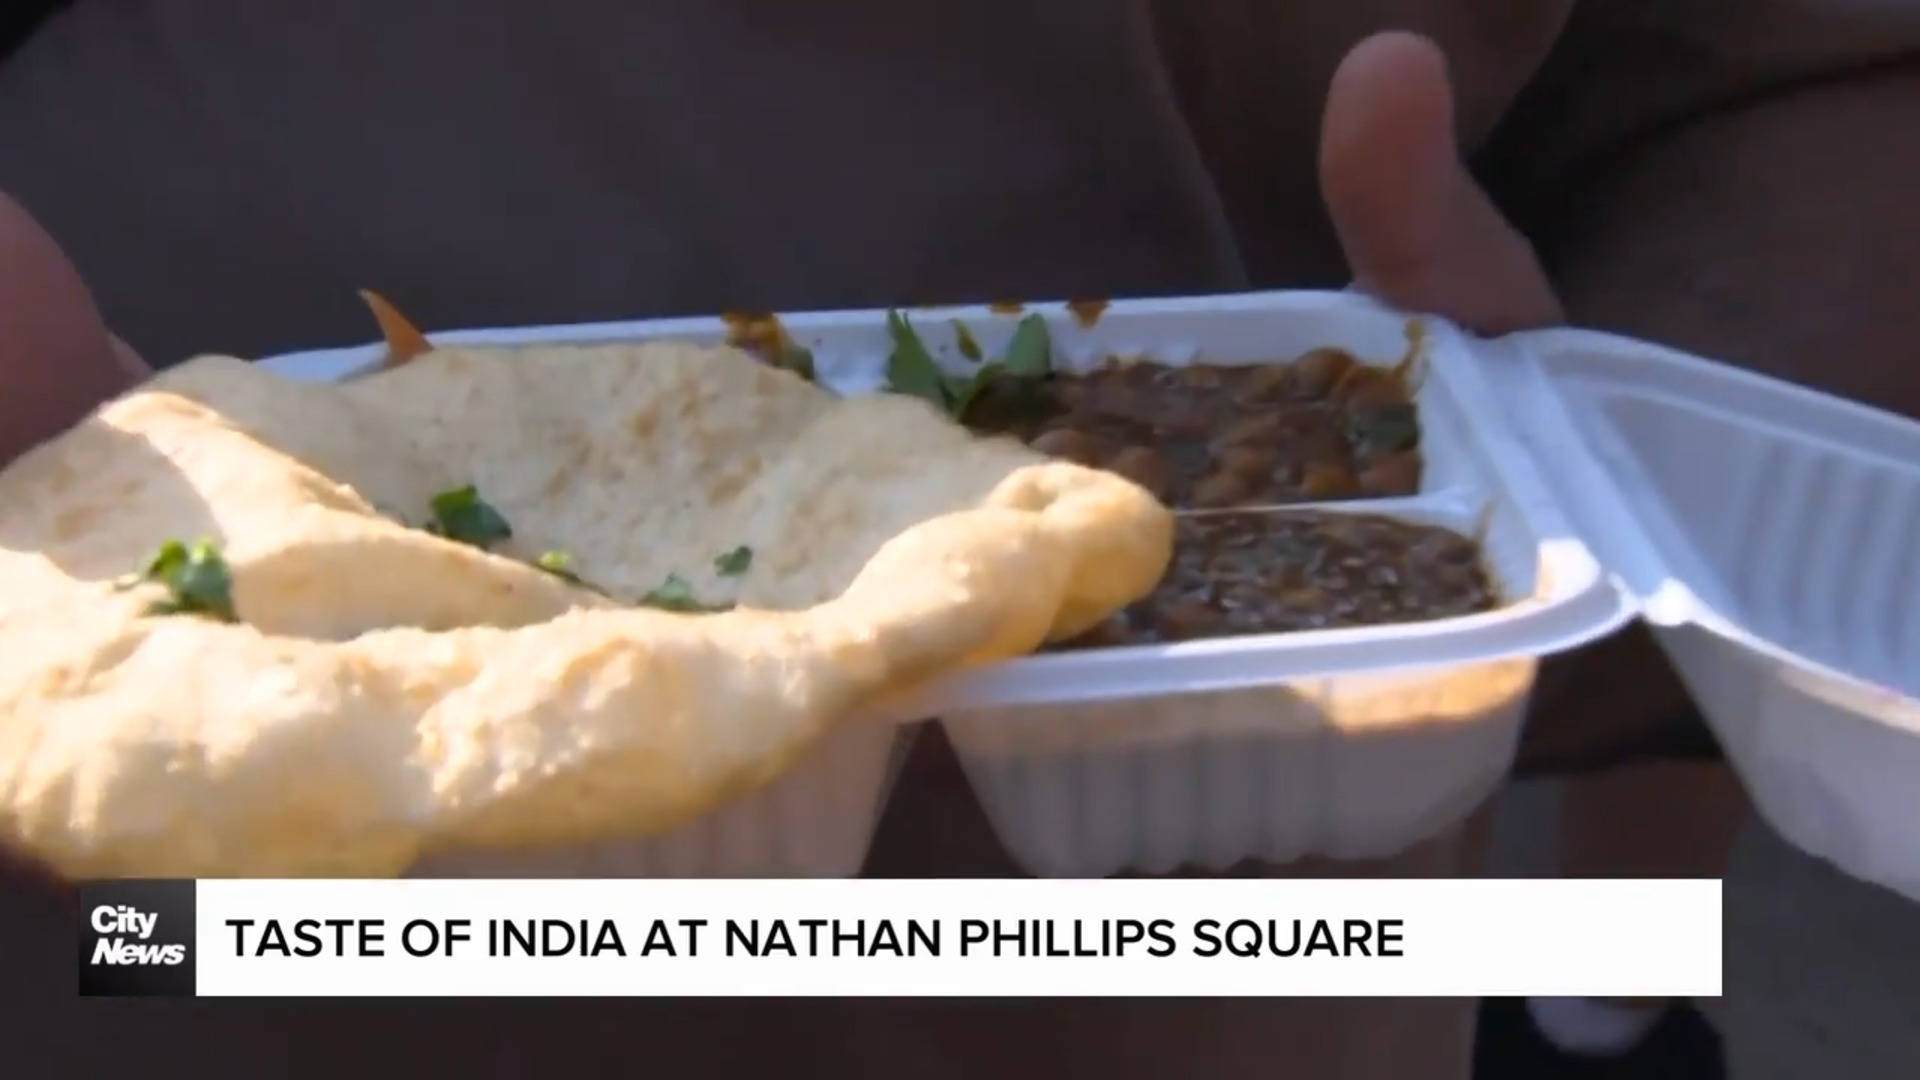 Taste of India at Nathan Phillips Square